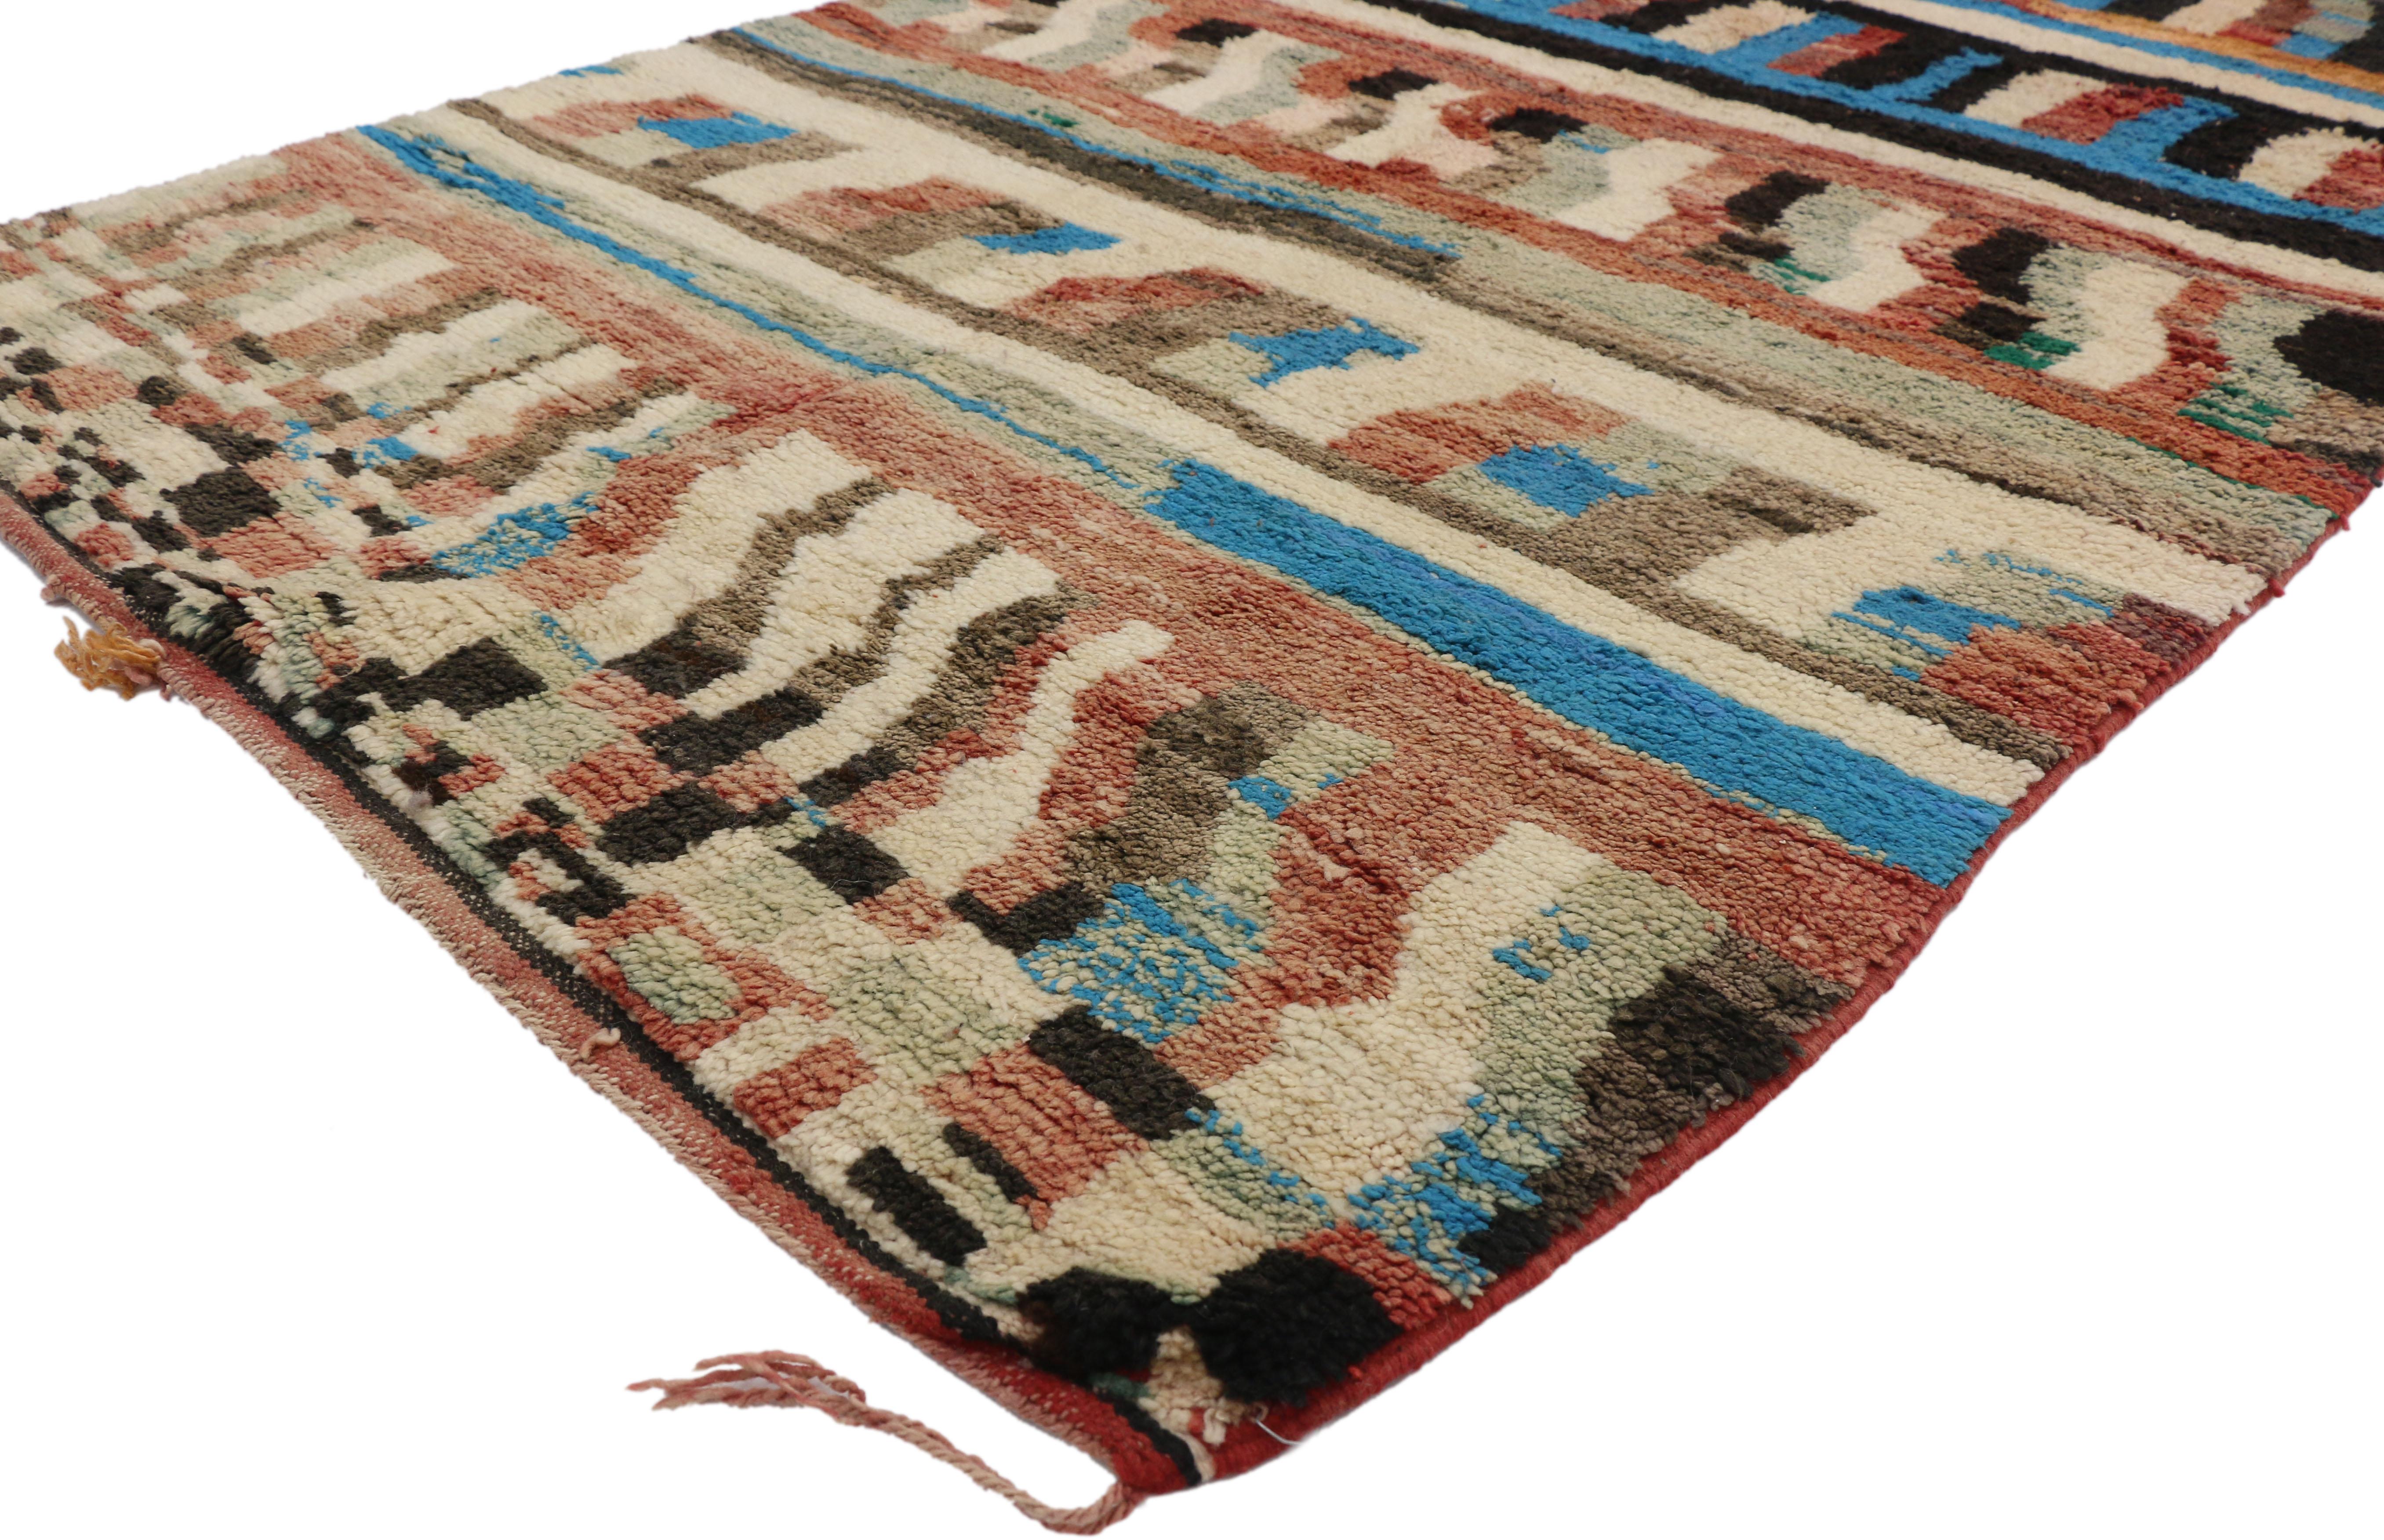 20076 Vintage Boujad Moroccan Rug, 05'02 x 08'04. Boujad rugs originate from the Khouribga region nestled in the Middle Atlas Mountains of Morocco. Handwoven by Berber tribes, notably the Haouz and Rehamna, these carpets boast vibrant colors,